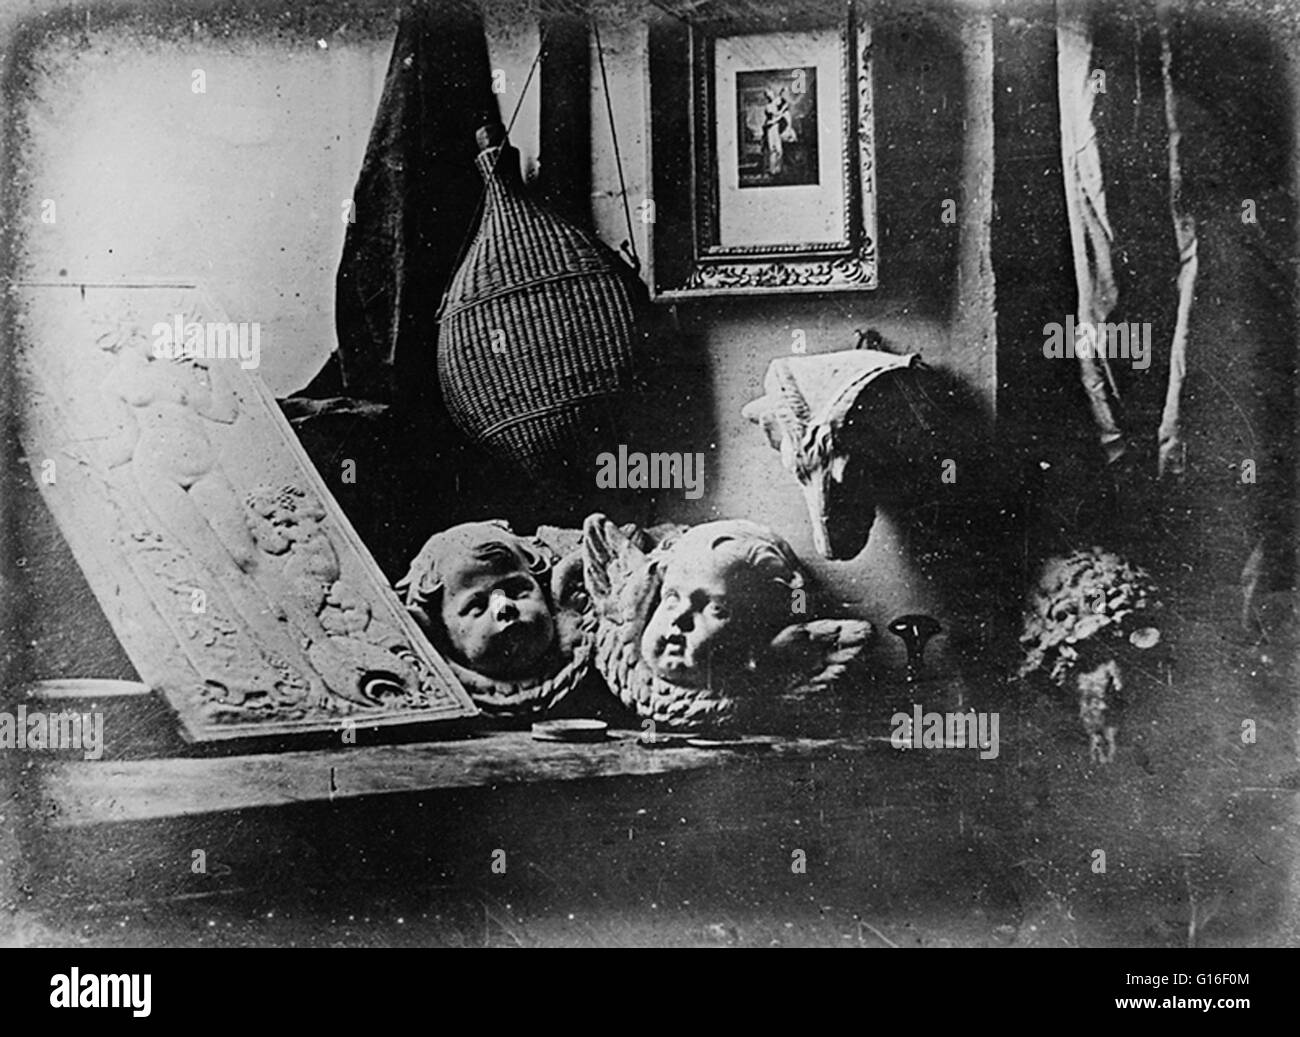 Daguerre's earliest reliably dated daguerreotype, a still life with plaster casts, was made in 1837. Louis Daguerre (1787-1851) was a French artist and photographer, recognized for his invention of the daguerreotype process of photography. The daguerreoty Stock Photo